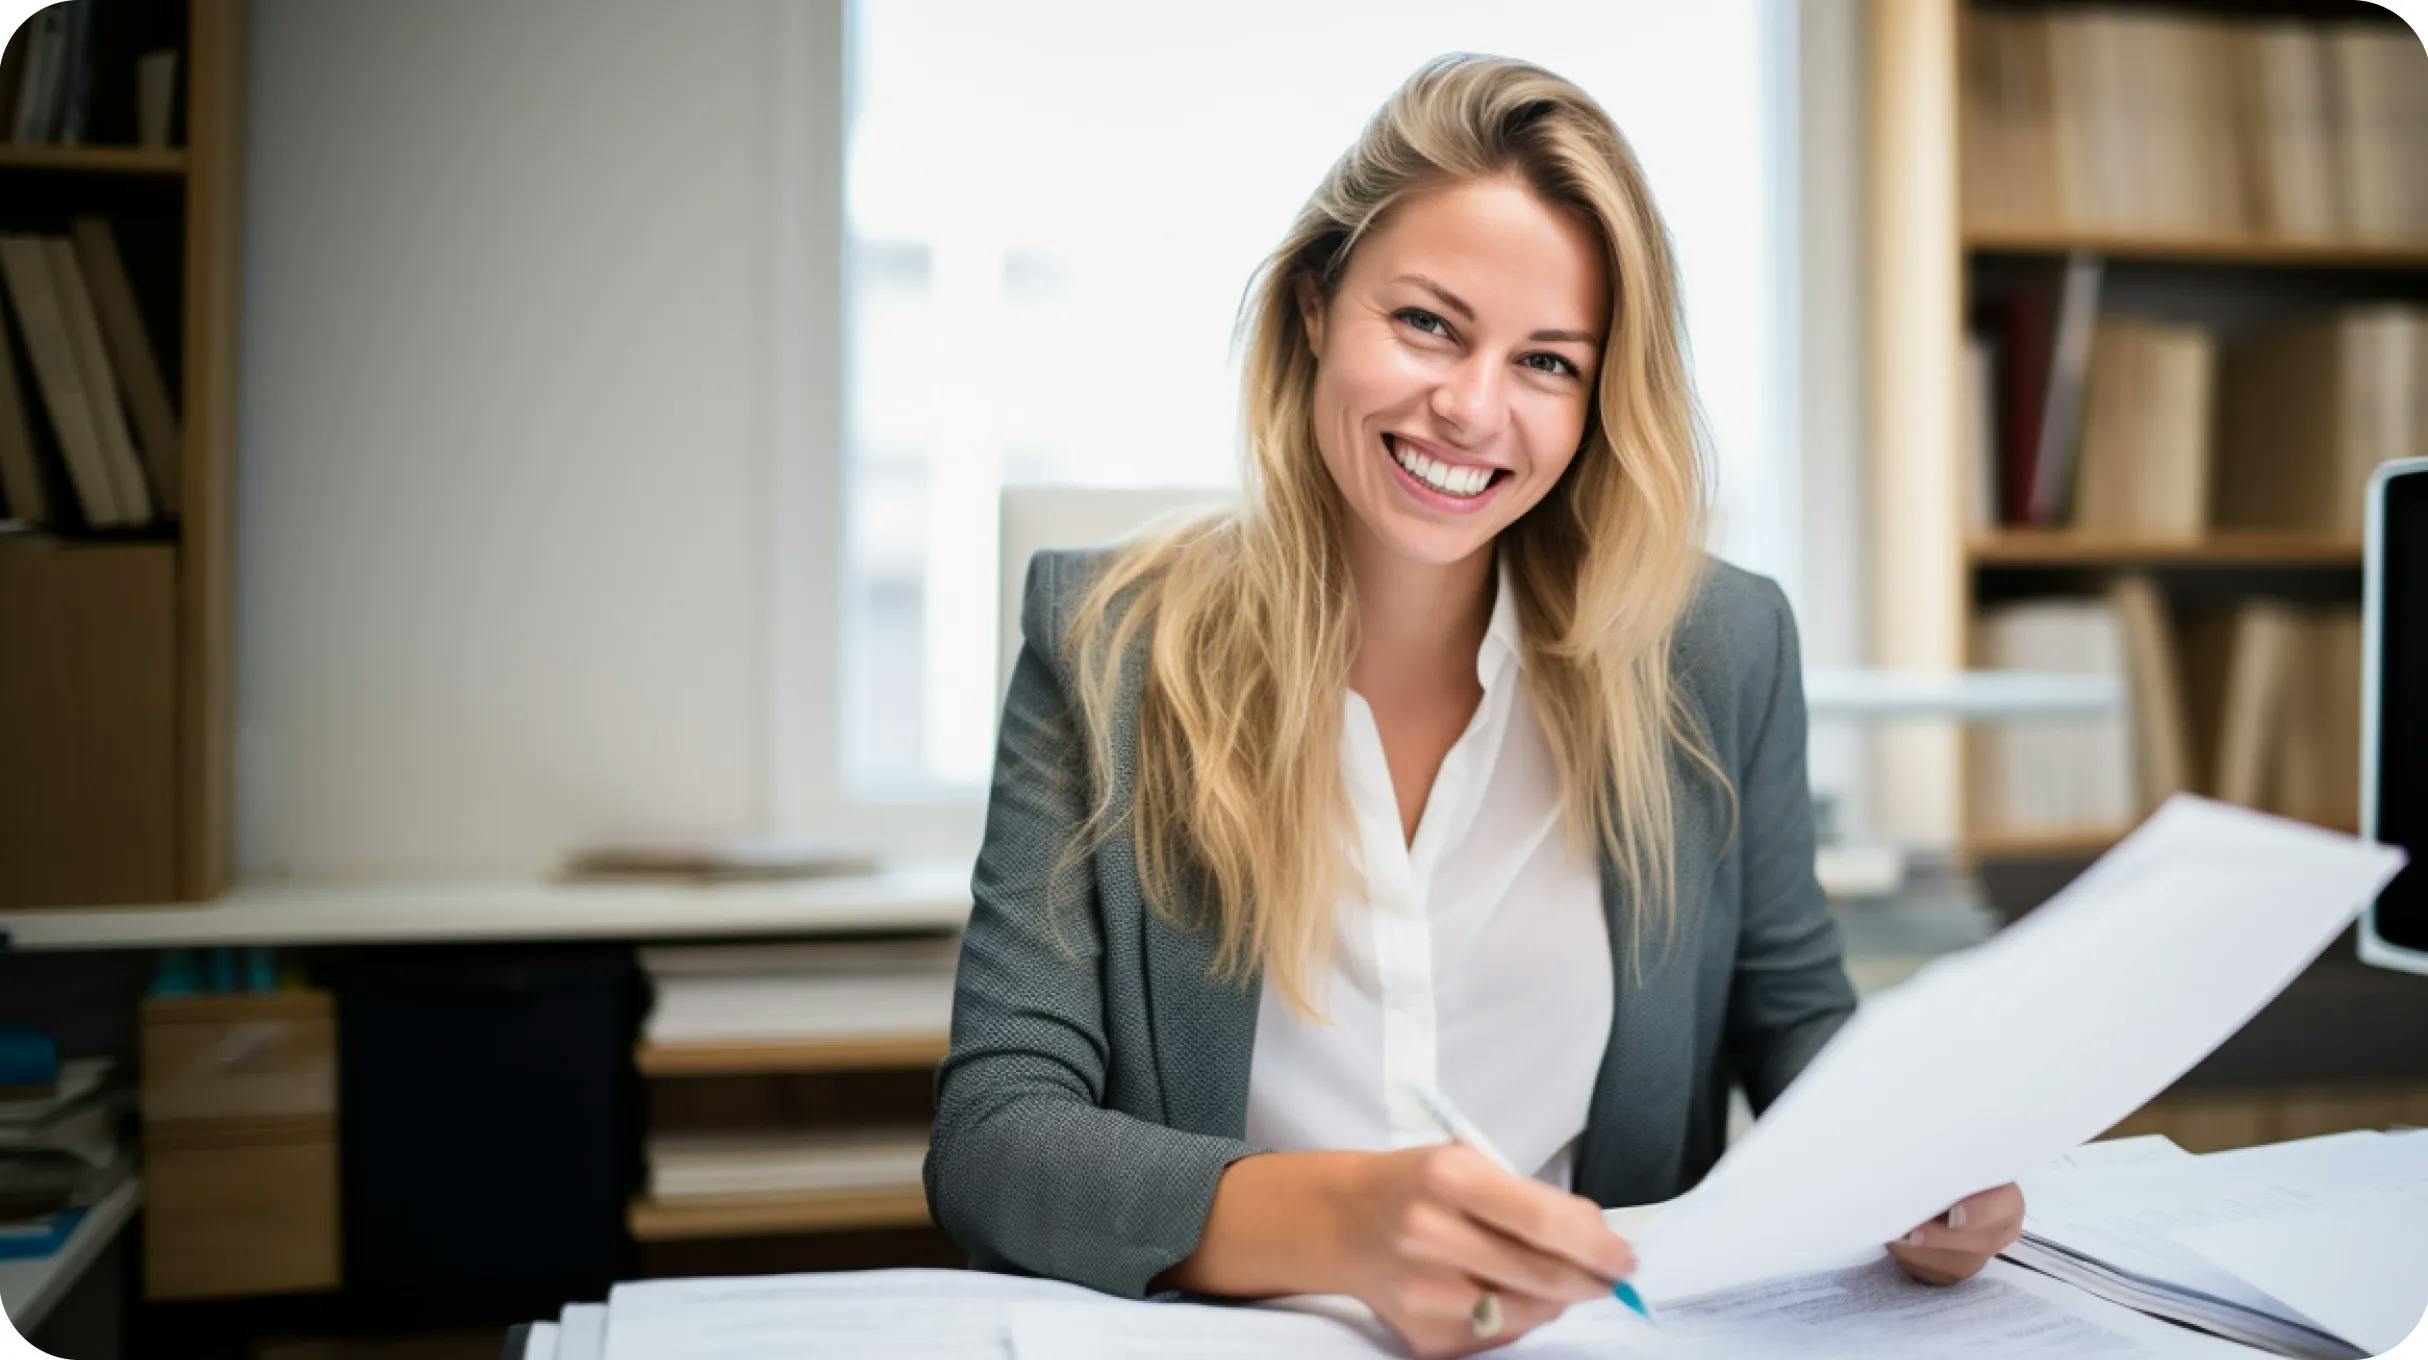 Smiling woman looking at the camera, holding some company paperwork in an office